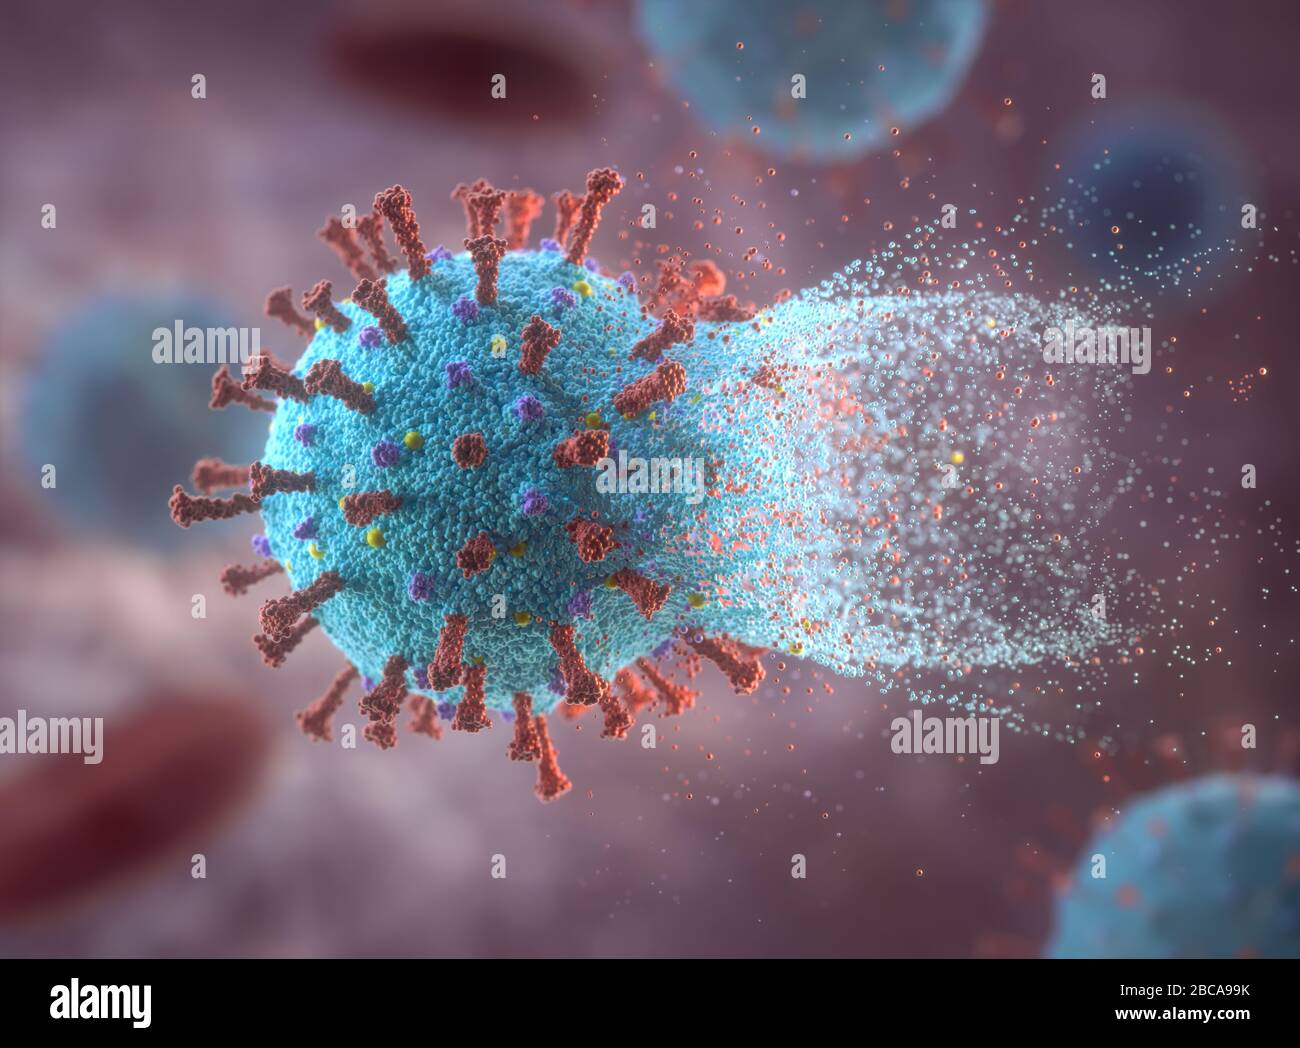 Eradicating covid-19 coronavirus, conceptual illustration. The new coronavirus SARS-CoV-2 (previously 2019-CoV) emerged in Wuhan, China, in December 2019. The virus causes a mild respiratory illness (Covid-19) that can develop into pneumonia and be fatal in some cases. The coronaviruses take their name from their crown (corona) of surface spike proteins (large protrusions), which are used to attach and penetrate their host cells. Stock Photo